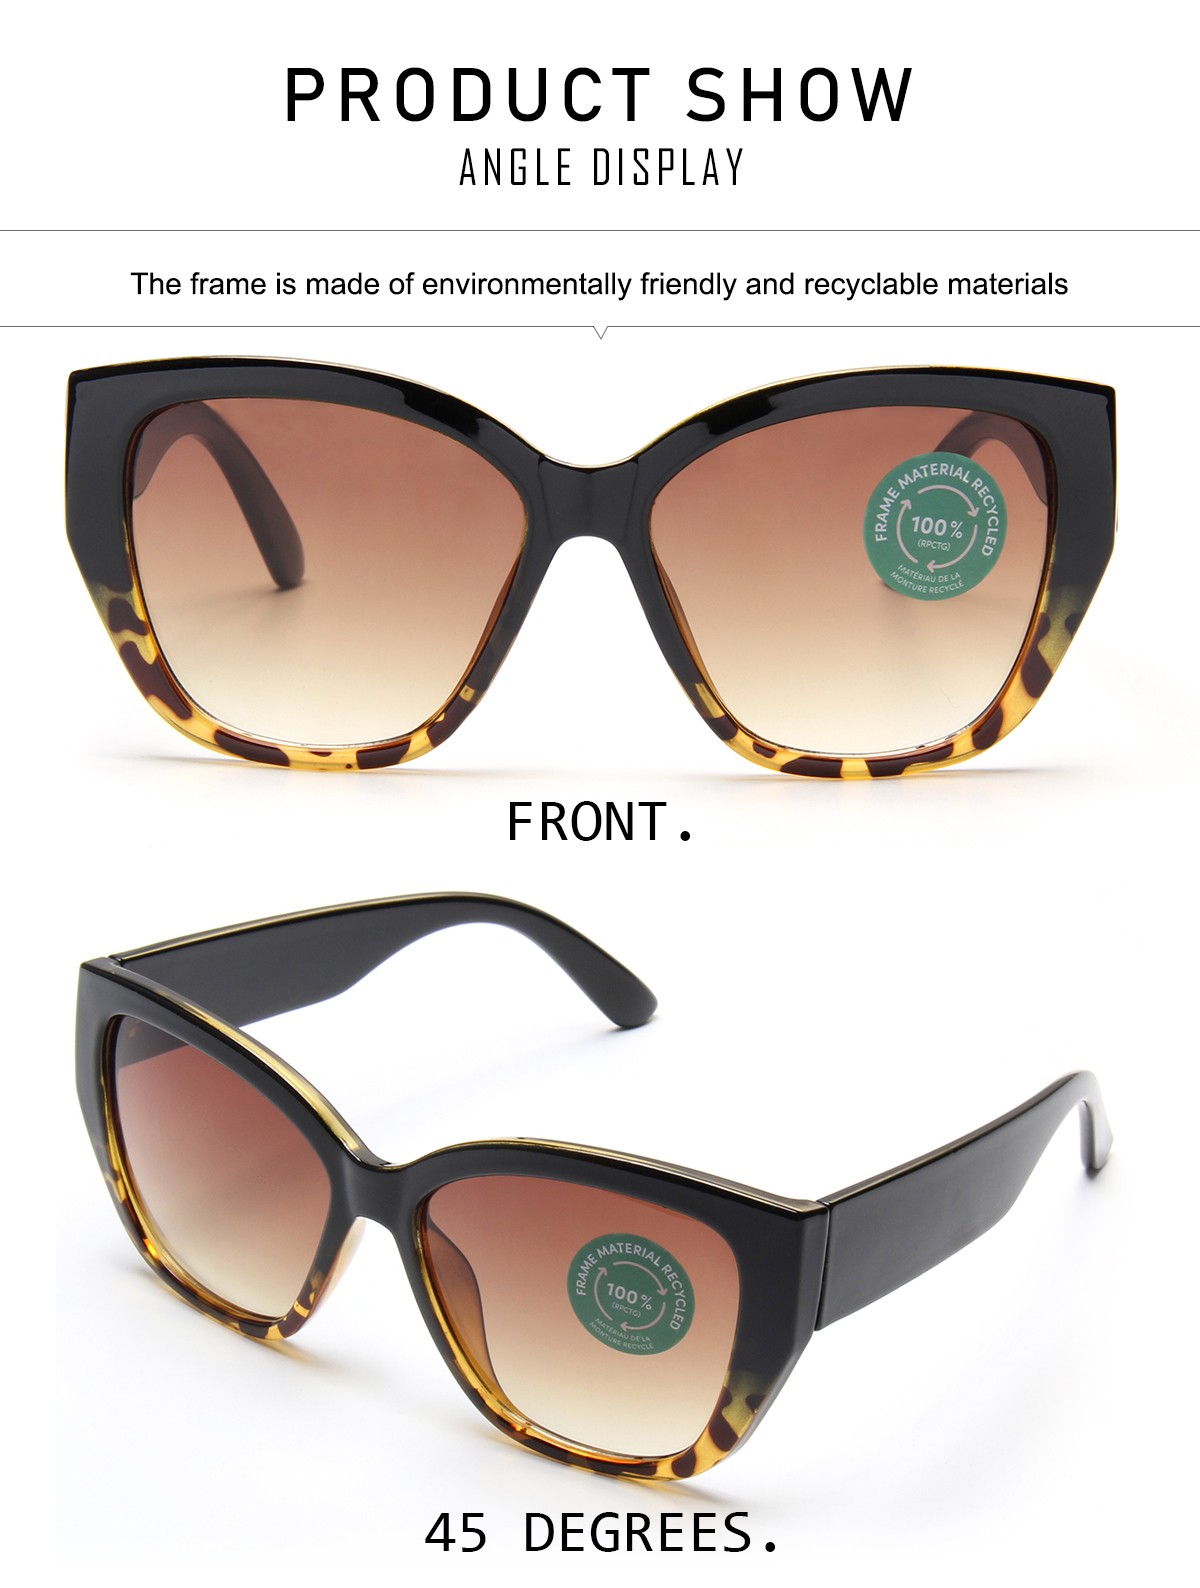 Eugenia eco-friendly recycled sunglasses marketing for recycle-2